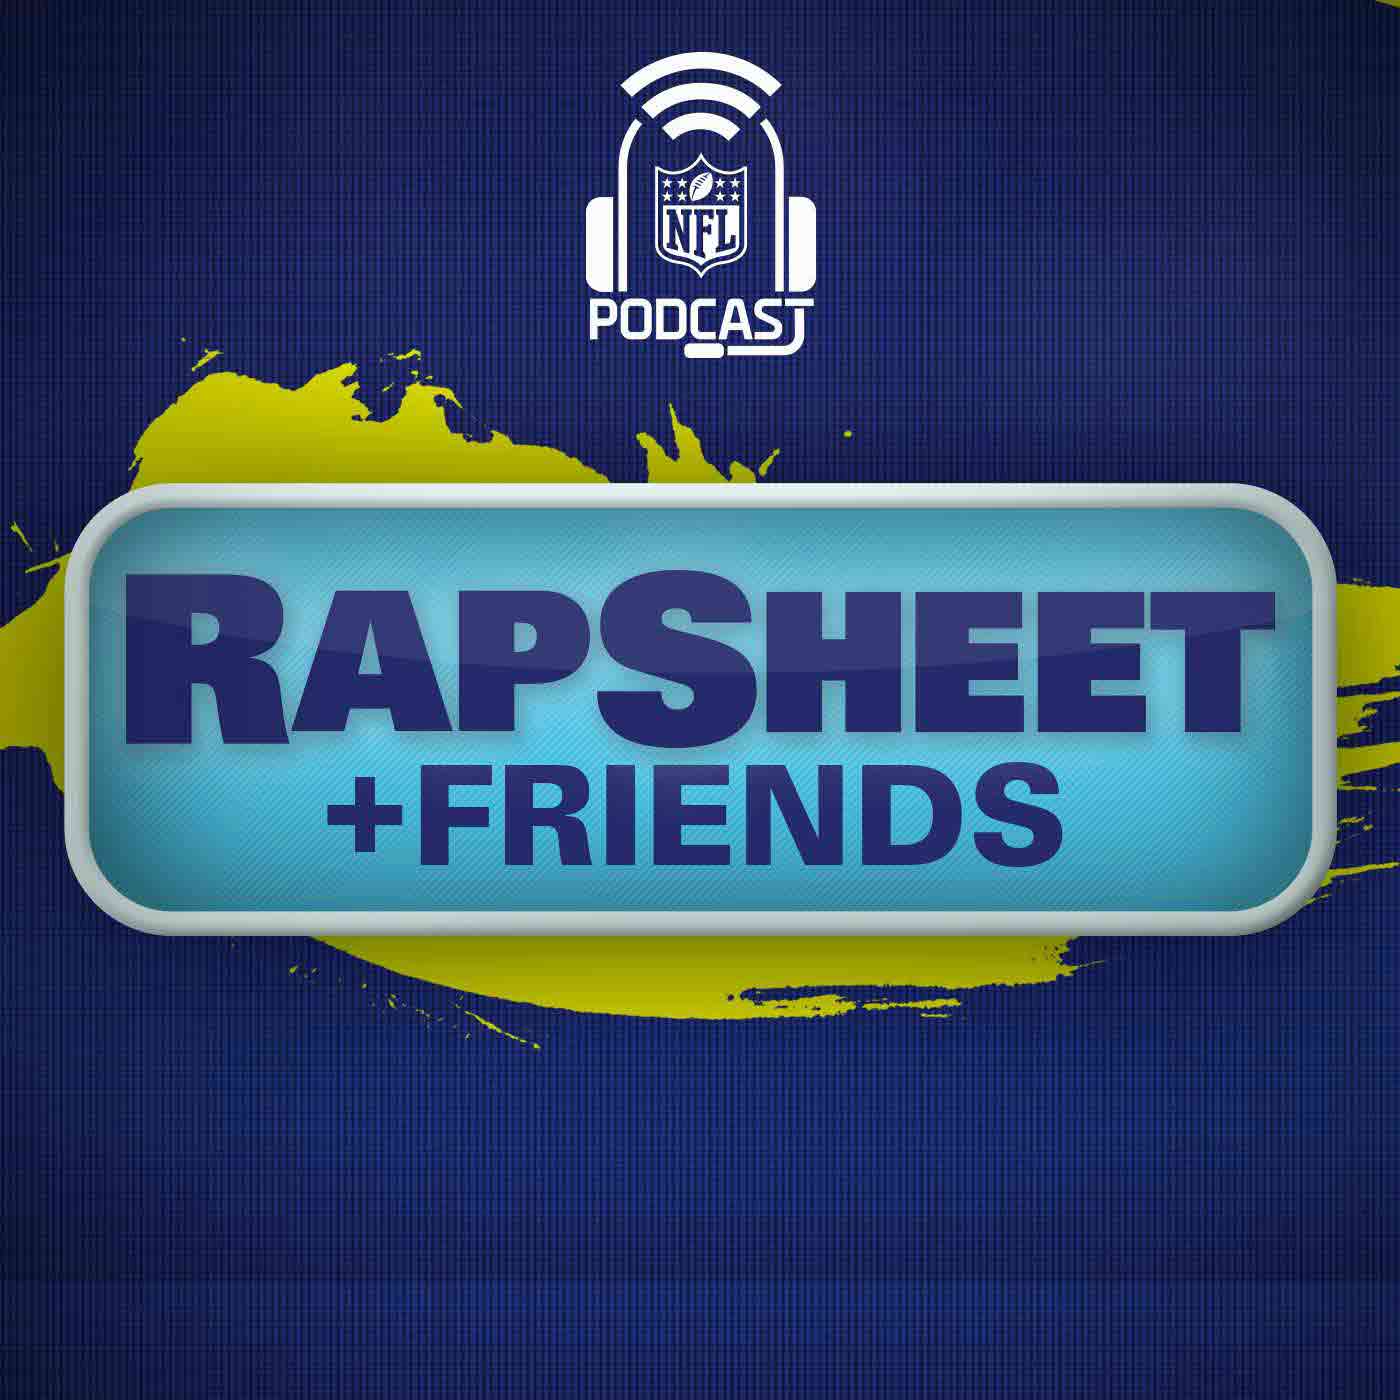 WESTWOOD ONE PODCAST NETWORK AND THE NFL KICK OFF RAPSHEET AND FRIENDS ORIGINAL PODCAST HOSTED BY NFL NETWORK NATIONAL INSIDER IAN “RAPSHEET” RAPOPORT